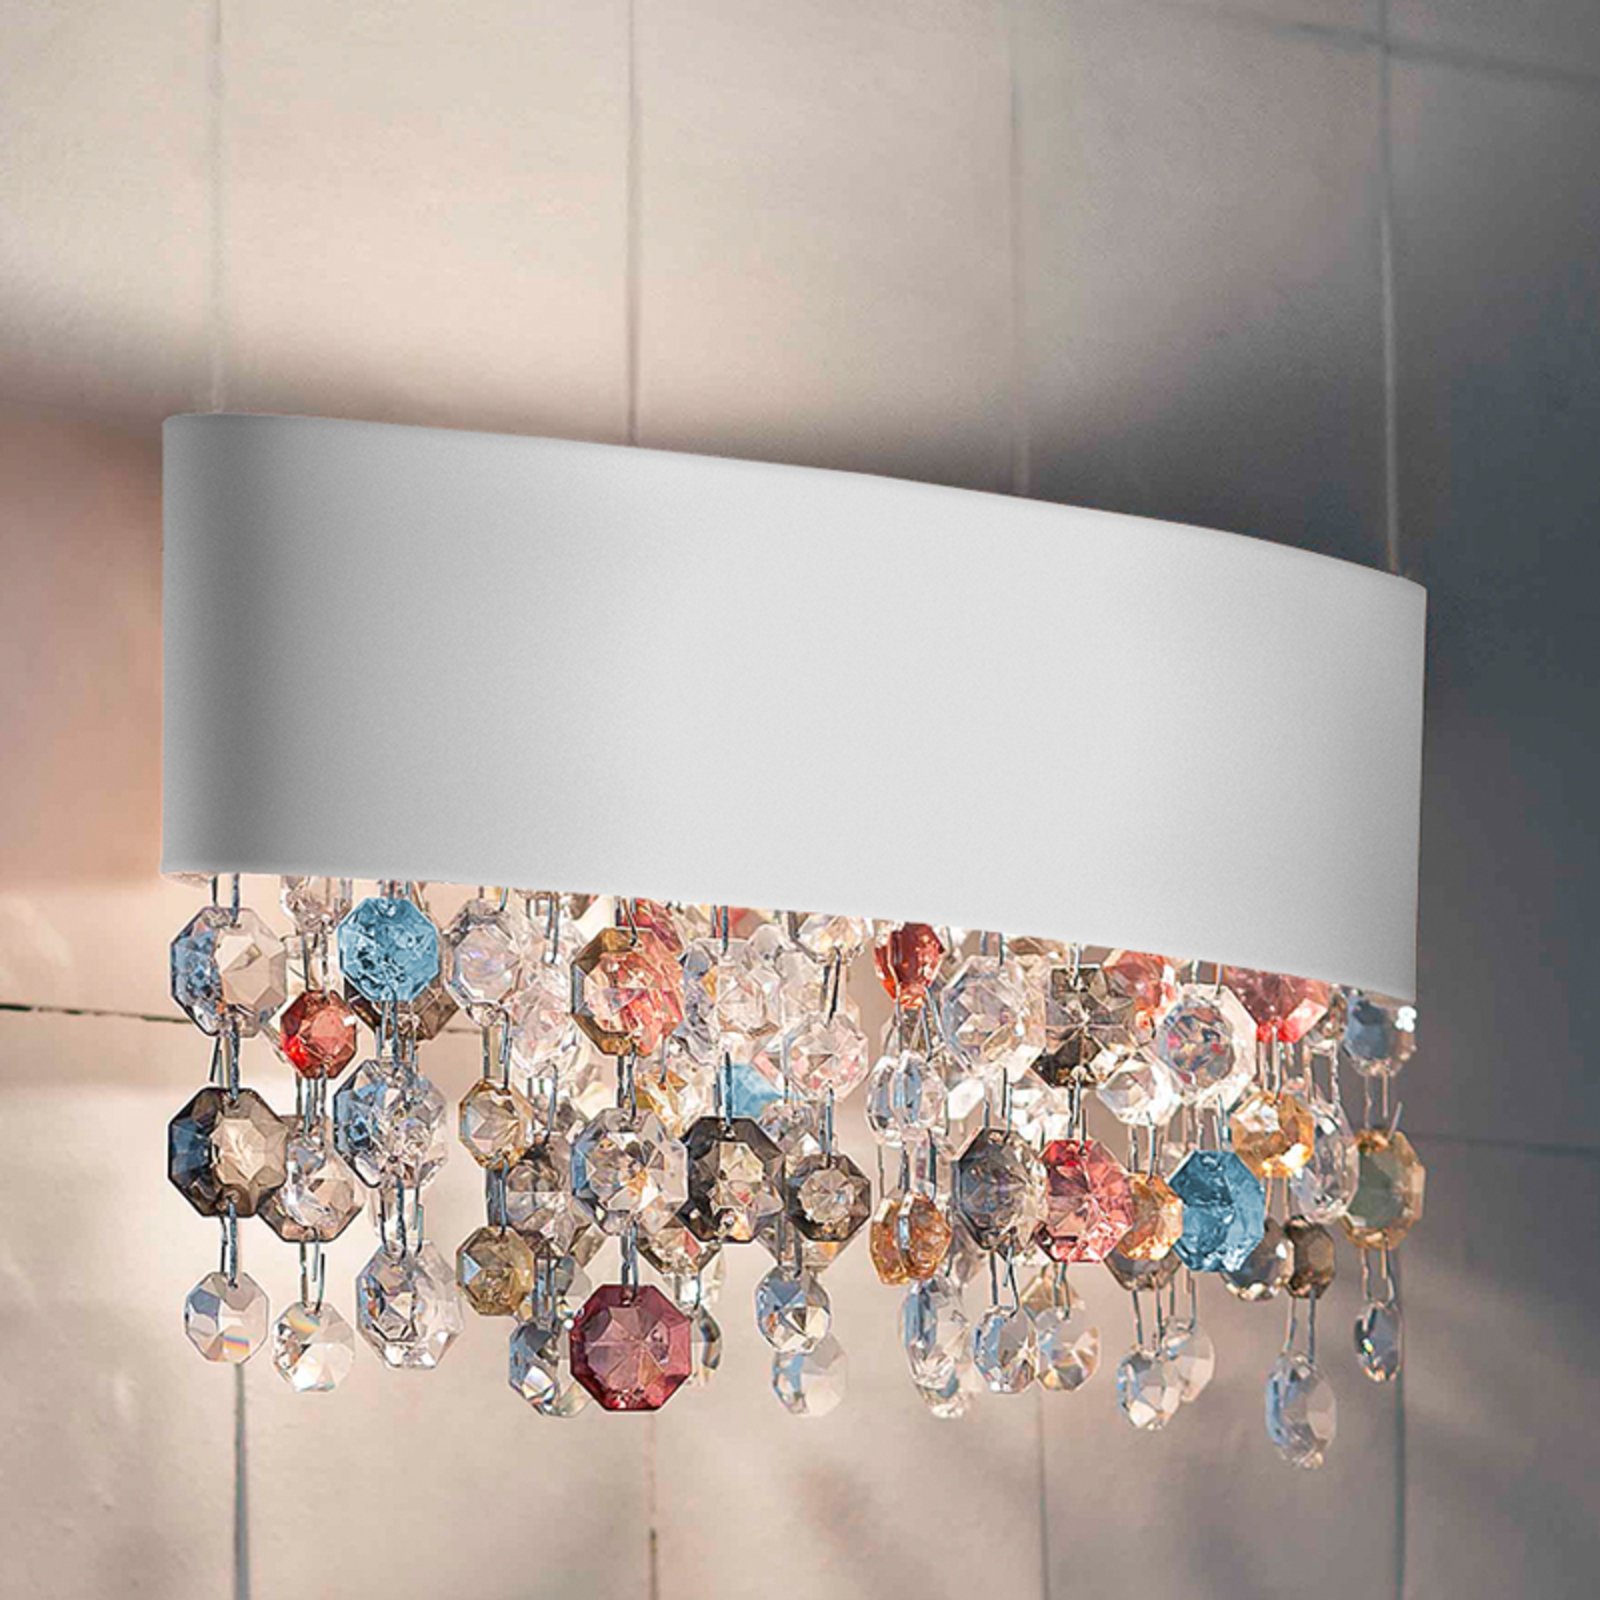 Ola OV 50 wall light white/coloured cold crystals